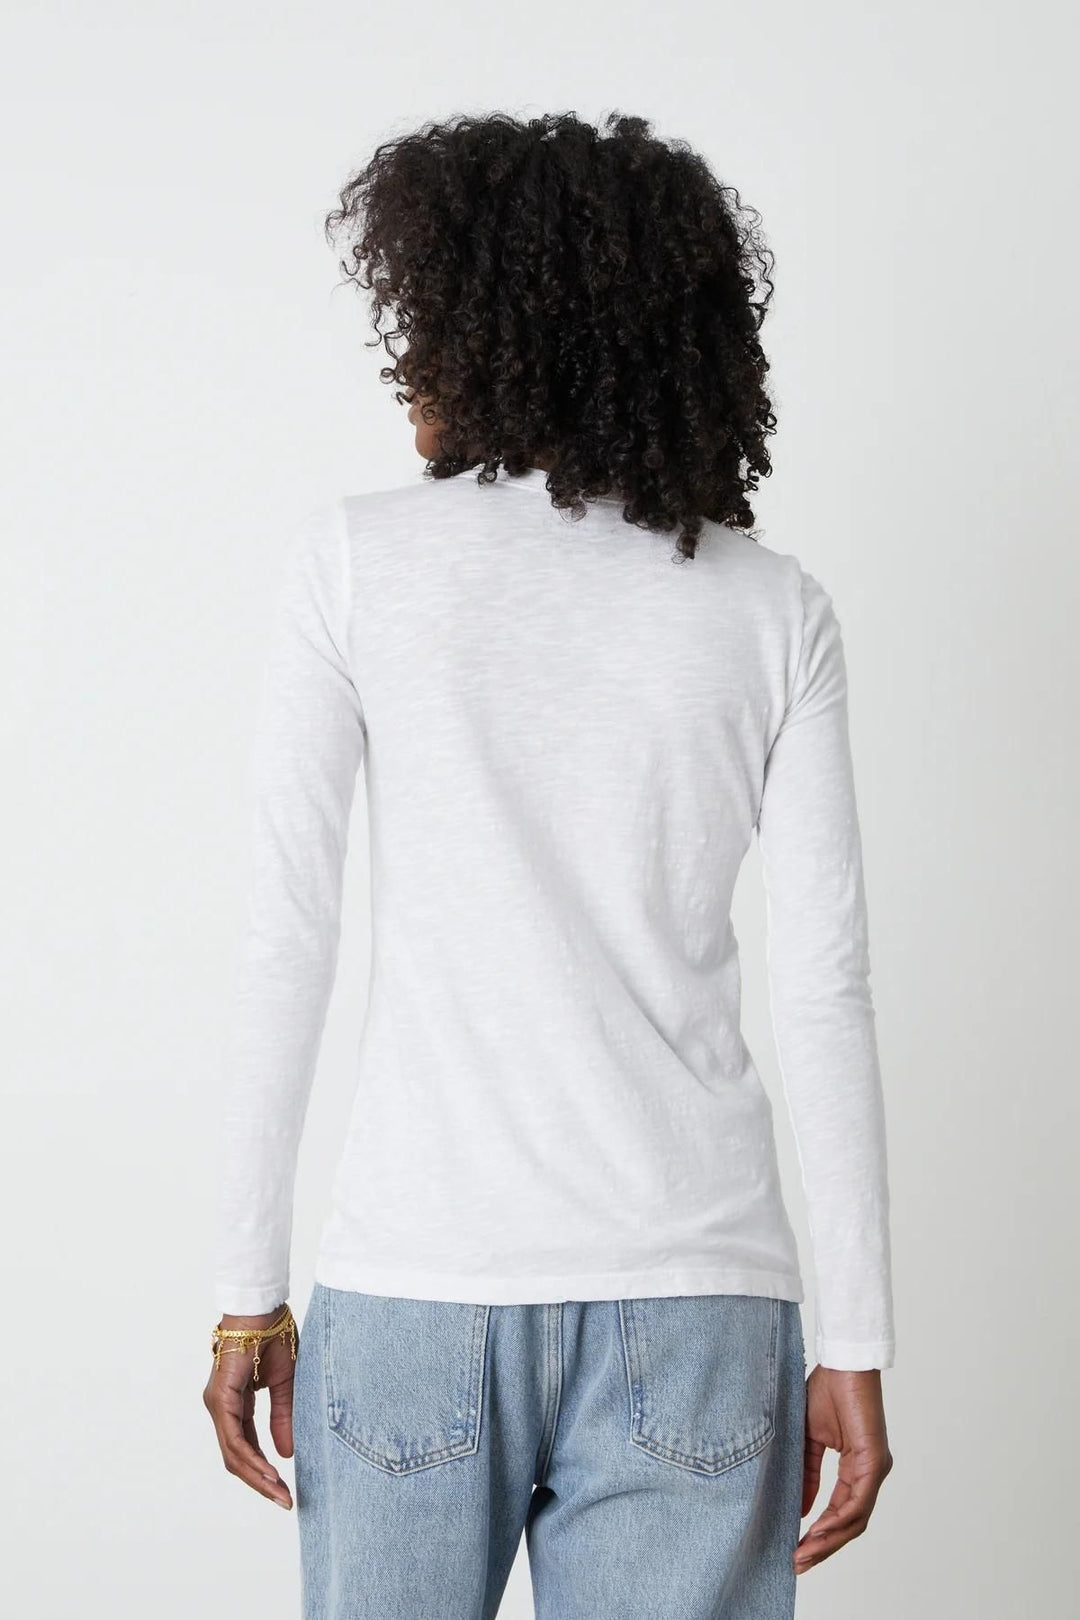 Lizzie long sleeve t-shirt (White)